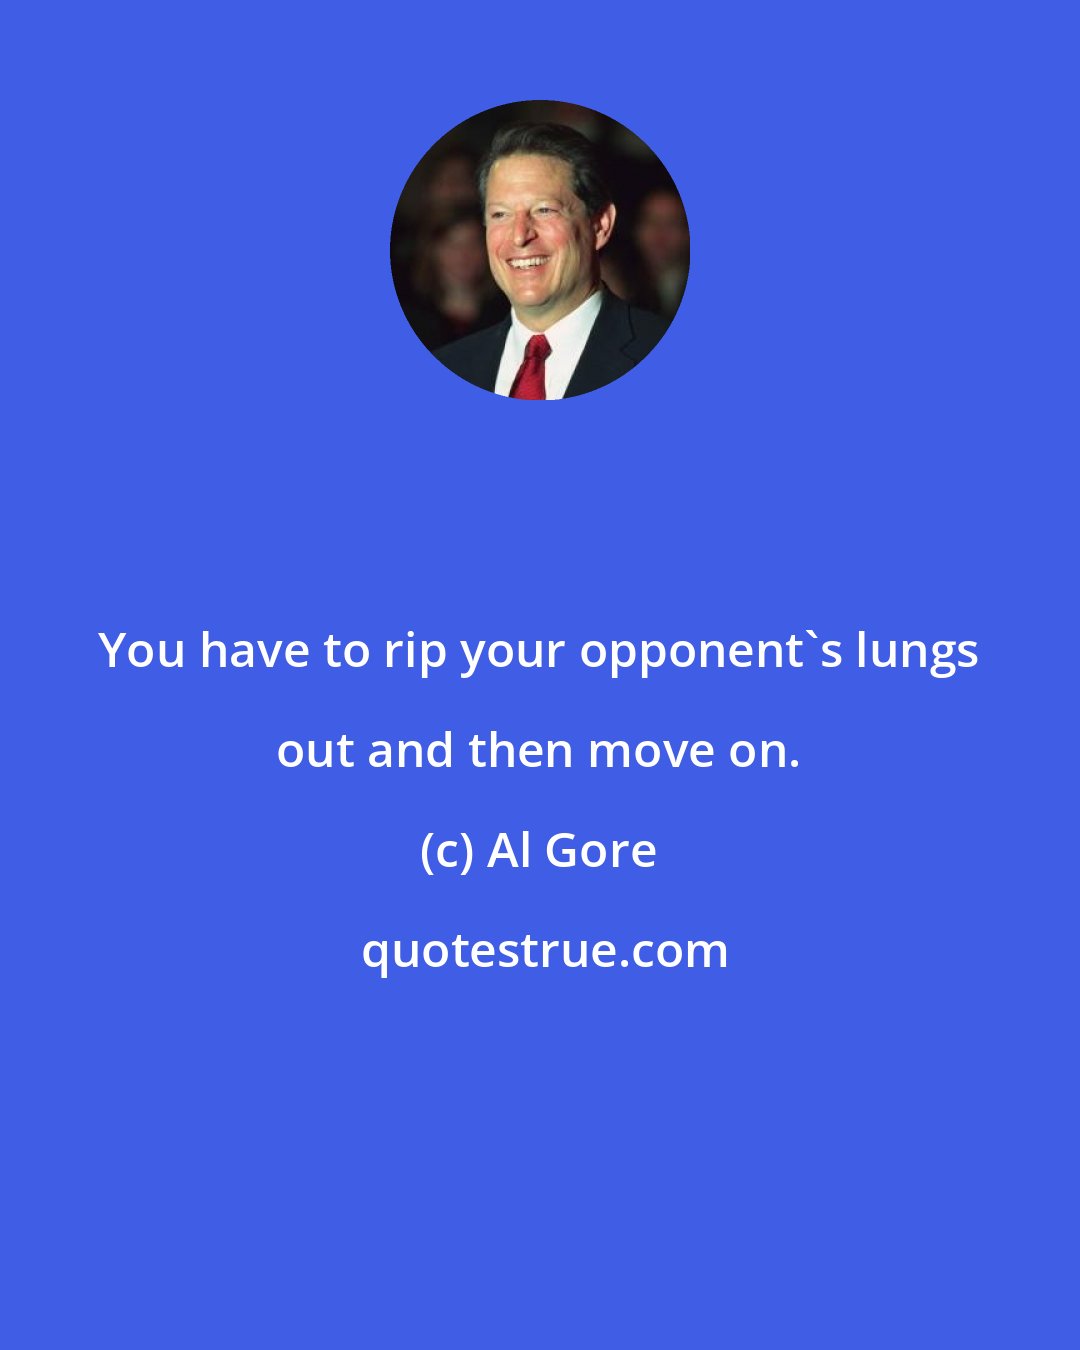 Al Gore: You have to rip your opponent's lungs out and then move on.